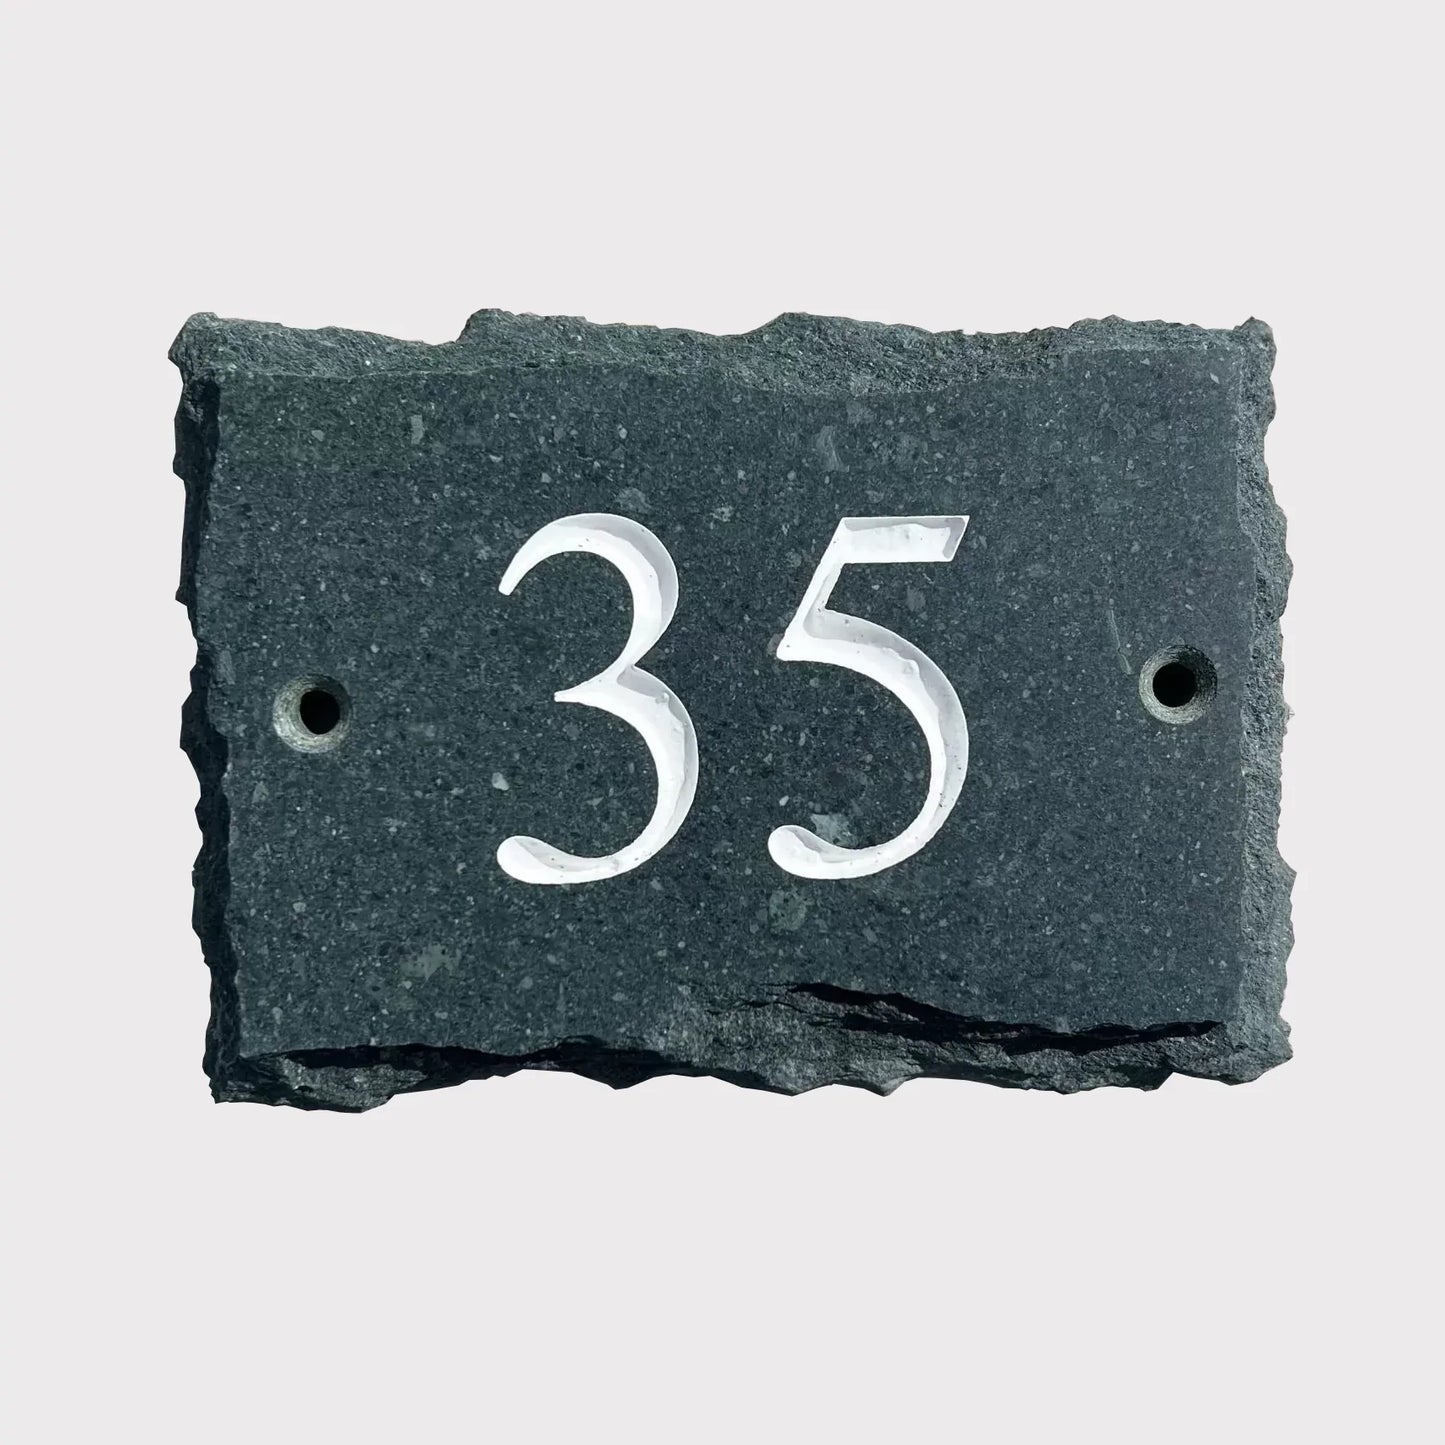 6x5" House Number Sign